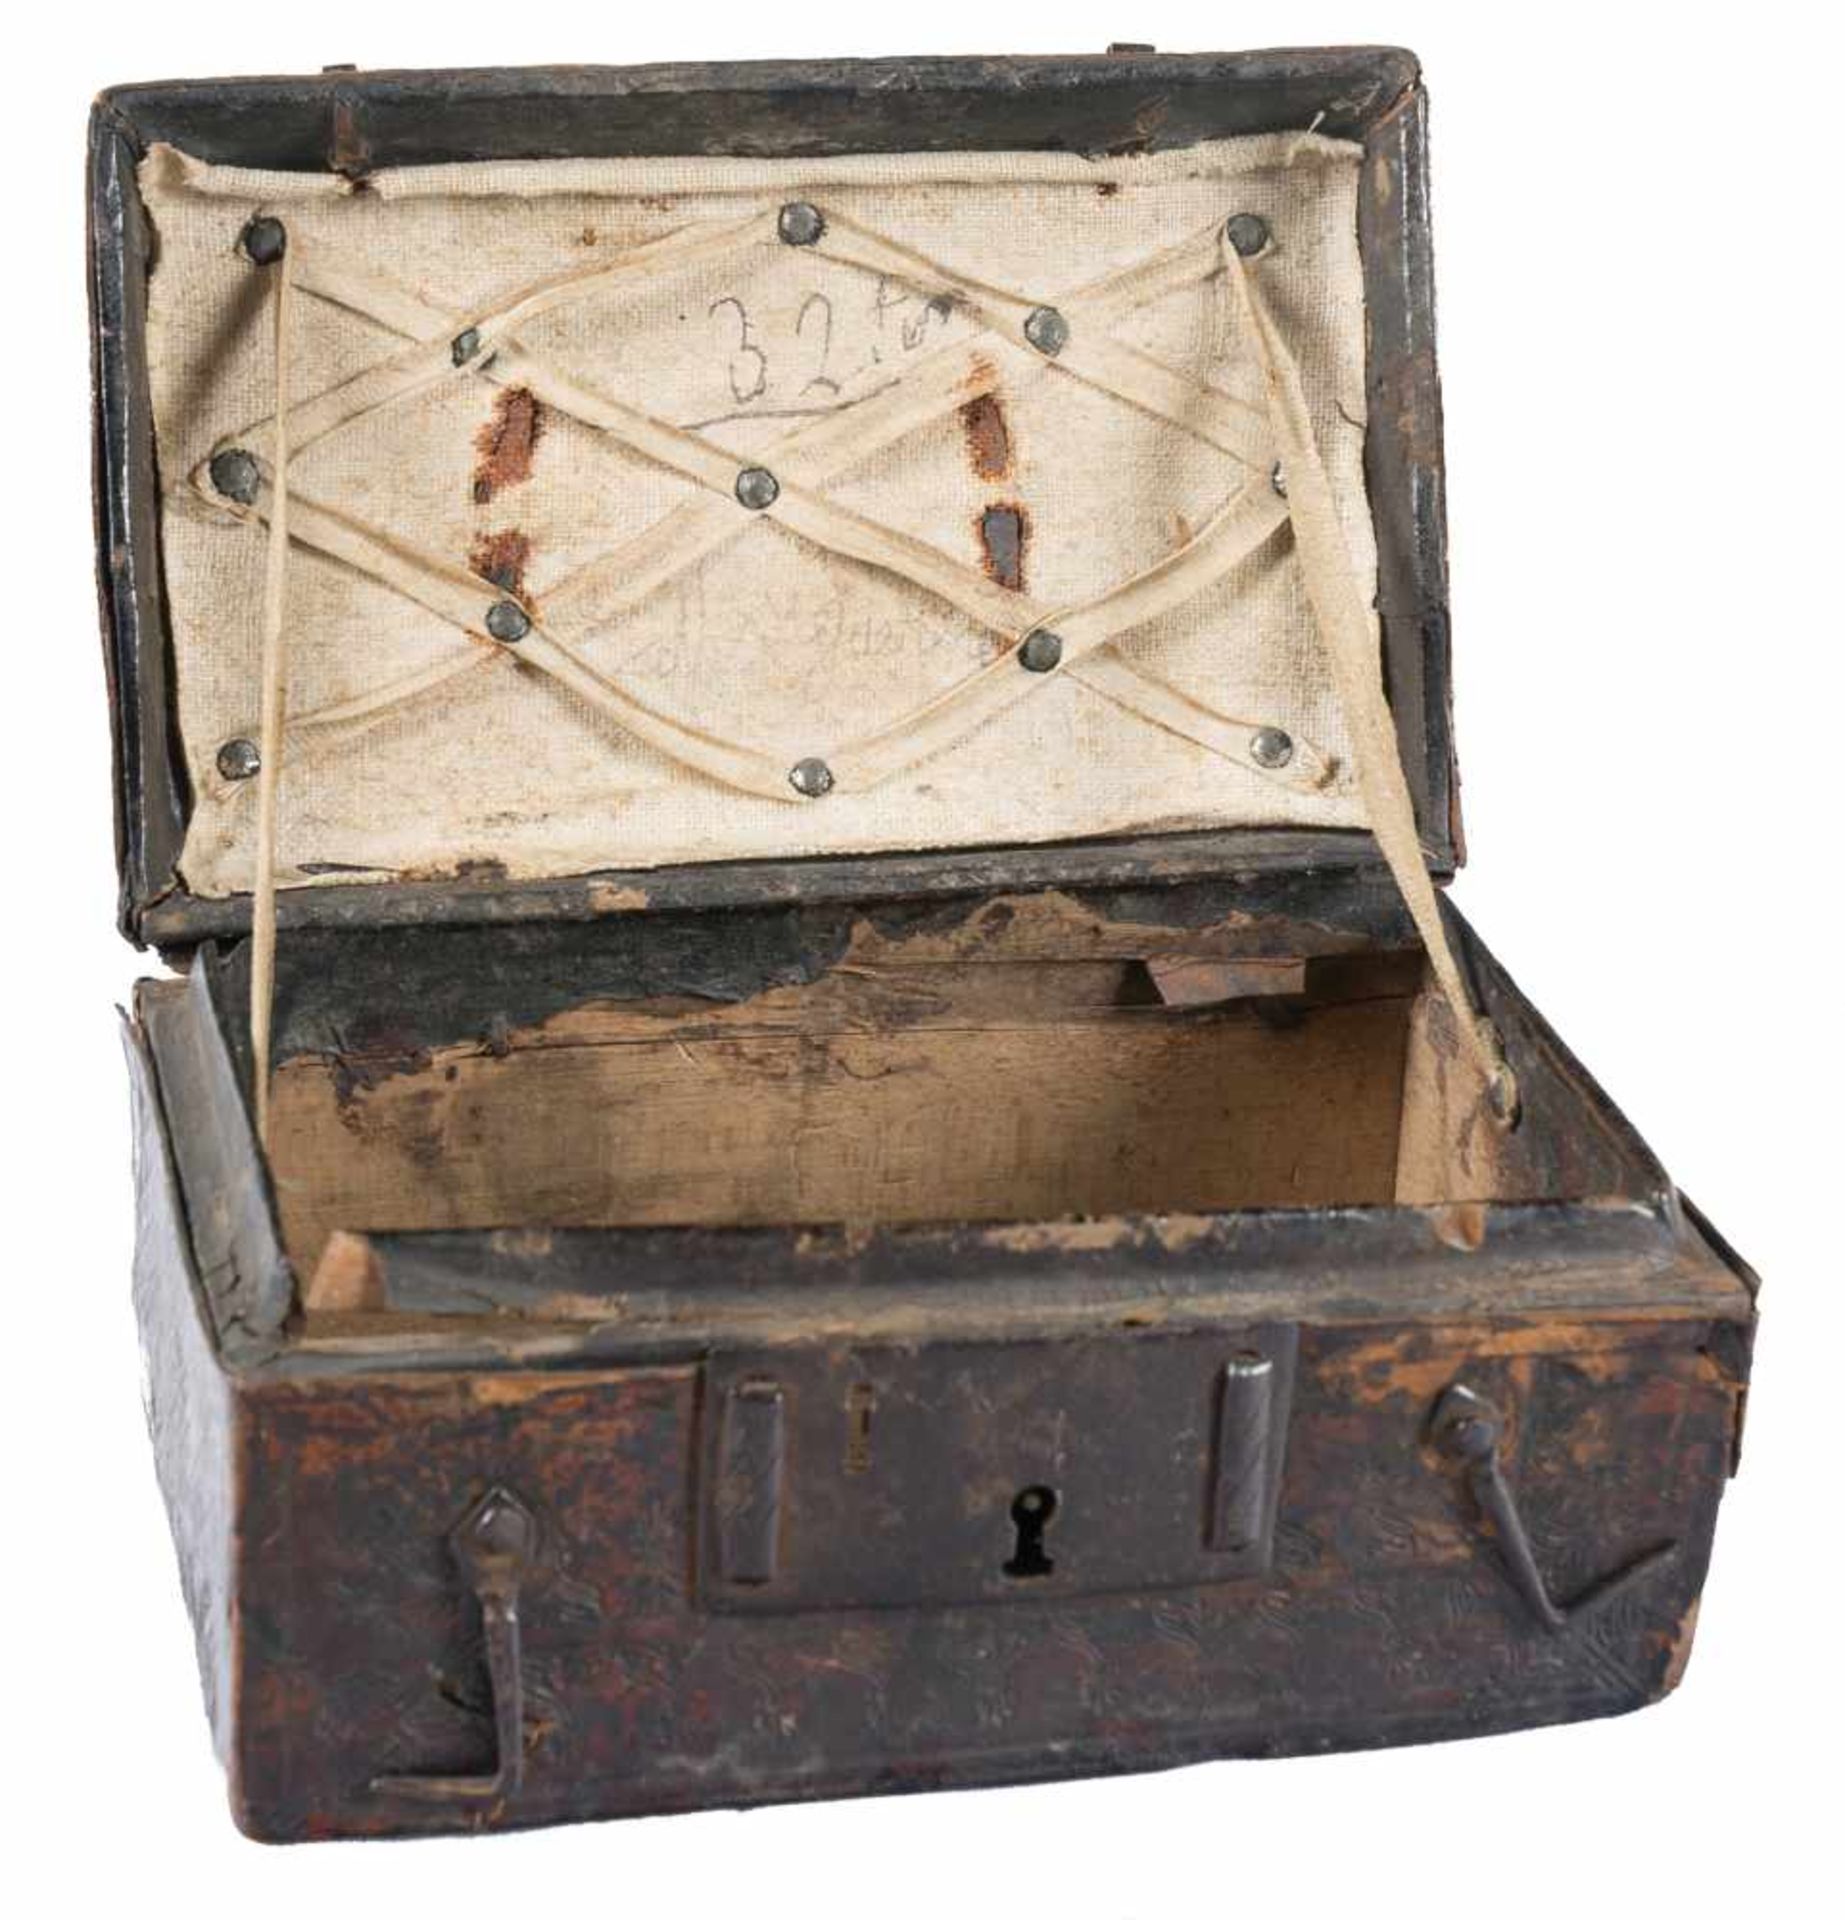 Engraved cordovan leather chest with iron fittings and wooden base. 15th century. ↵↵Flaws. 9 x 18 - Bild 4 aus 5